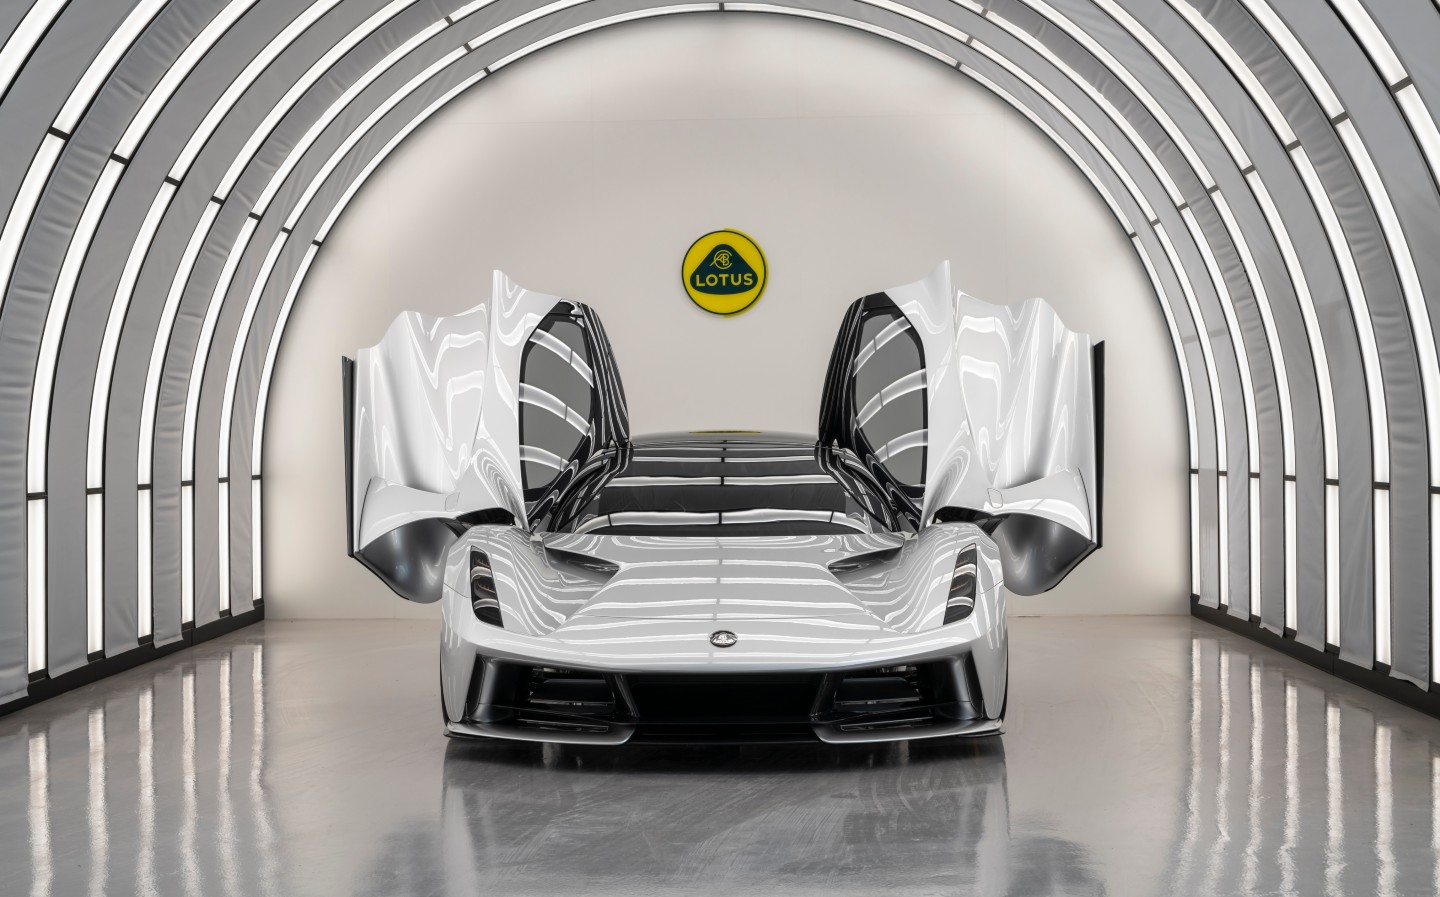 Lotus boss Phil Popham interview with Will Dron: Evija hypercar back on track as company expands after lockdown - Evija hypercar